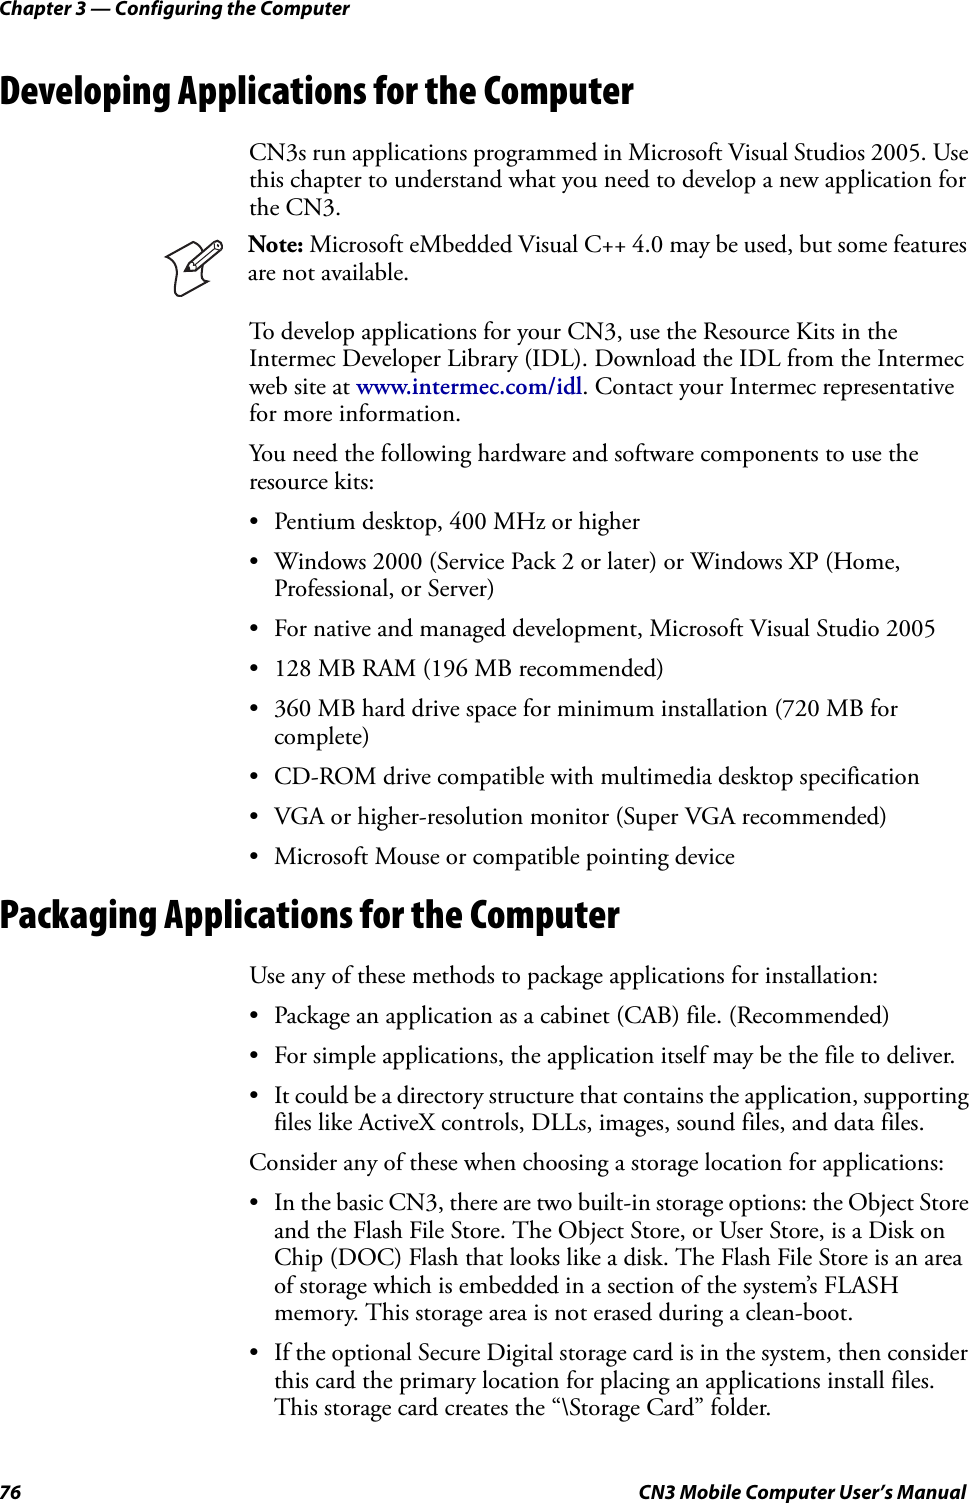 Chapter 3 — Configuring the Computer76 CN3 Mobile Computer User’s ManualDeveloping Applications for the ComputerCN3s run applications programmed in Microsoft Visual Studios 2005. Use this chapter to understand what you need to develop a new application for the CN3.To develop applications for your CN3, use the Resource Kits in the Intermec Developer Library (IDL). Download the IDL from the Intermec web site at www.intermec.com/idl. Contact your Intermec representative for more information.You need the following hardware and software components to use the resource kits:• Pentium desktop, 400 MHz or higher• Windows 2000 (Service Pack 2 or later) or Windows XP (Home, Professional, or Server)• For native and managed development, Microsoft Visual Studio 2005• 128 MB RAM (196 MB recommended)• 360 MB hard drive space for minimum installation (720 MB for complete)• CD-ROM drive compatible with multimedia desktop specification• VGA or higher-resolution monitor (Super VGA recommended)• Microsoft Mouse or compatible pointing devicePackaging Applications for the ComputerUse any of these methods to package applications for installation:• Package an application as a cabinet (CAB) file. (Recommended)• For simple applications, the application itself may be the file to deliver.• It could be a directory structure that contains the application, supporting files like ActiveX controls, DLLs, images, sound files, and data files.Consider any of these when choosing a storage location for applications:• In the basic CN3, there are two built-in storage options: the Object Store and the Flash File Store. The Object Store, or User Store, is a Disk on Chip (DOC) Flash that looks like a disk. The Flash File Store is an area of storage which is embedded in a section of the system’s FLASH memory. This storage area is not erased during a clean-boot.• If the optional Secure Digital storage card is in the system, then consider this card the primary location for placing an applications install files. This storage card creates the “\Storage Card” folder.Note: Microsoft eMbedded Visual C++ 4.0 may be used, but some features are not available.